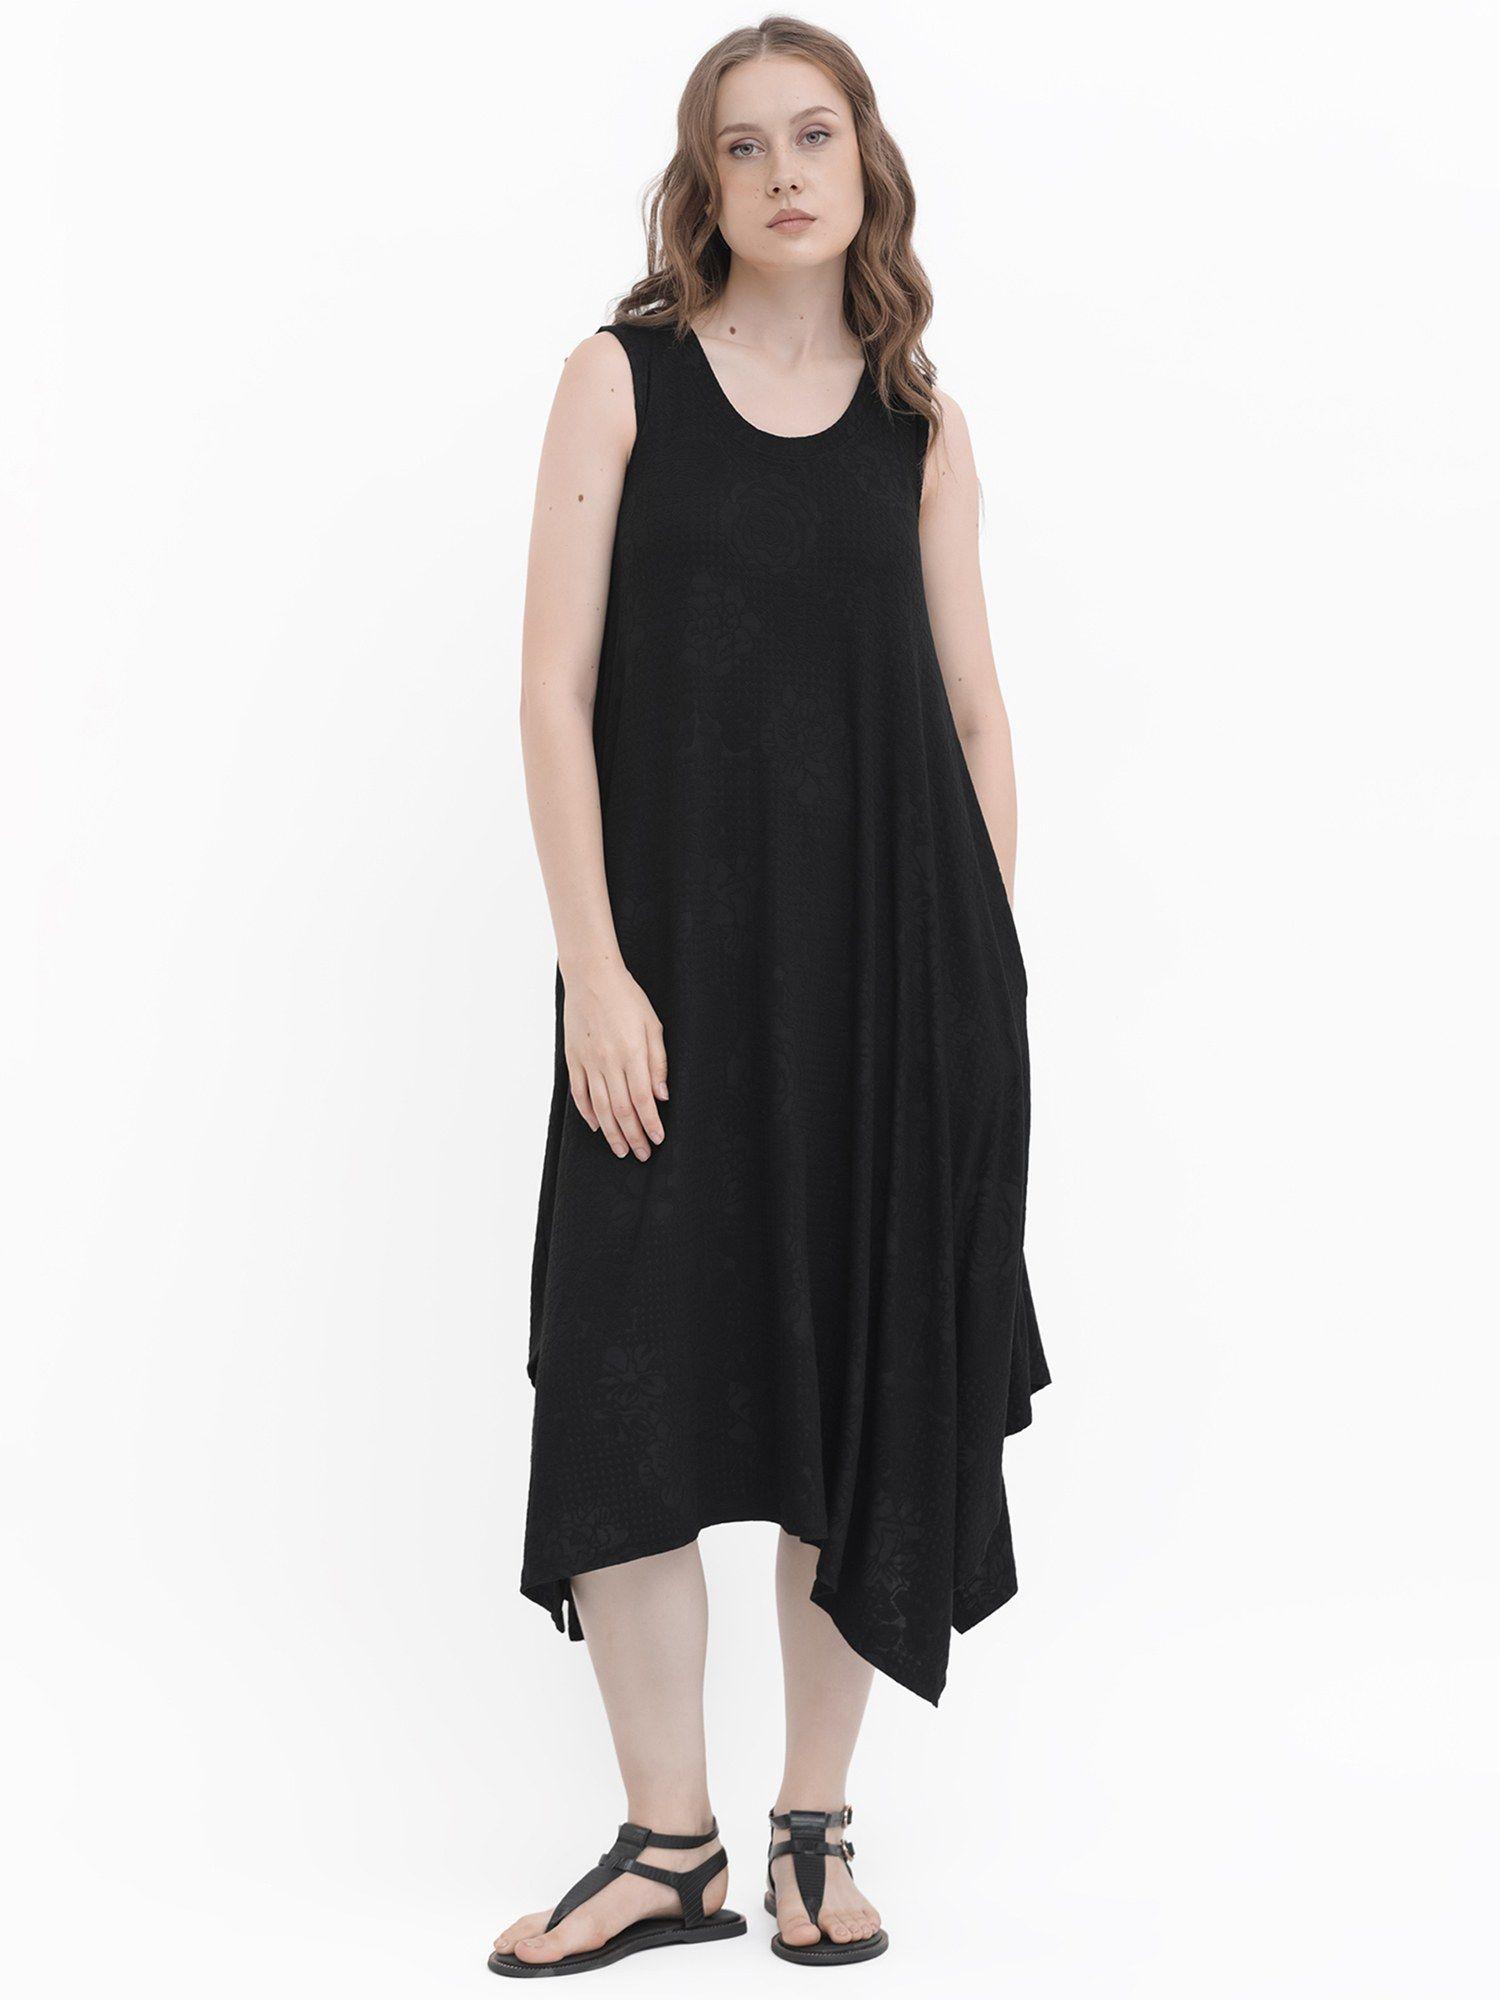 cassidy primary black polyester dress